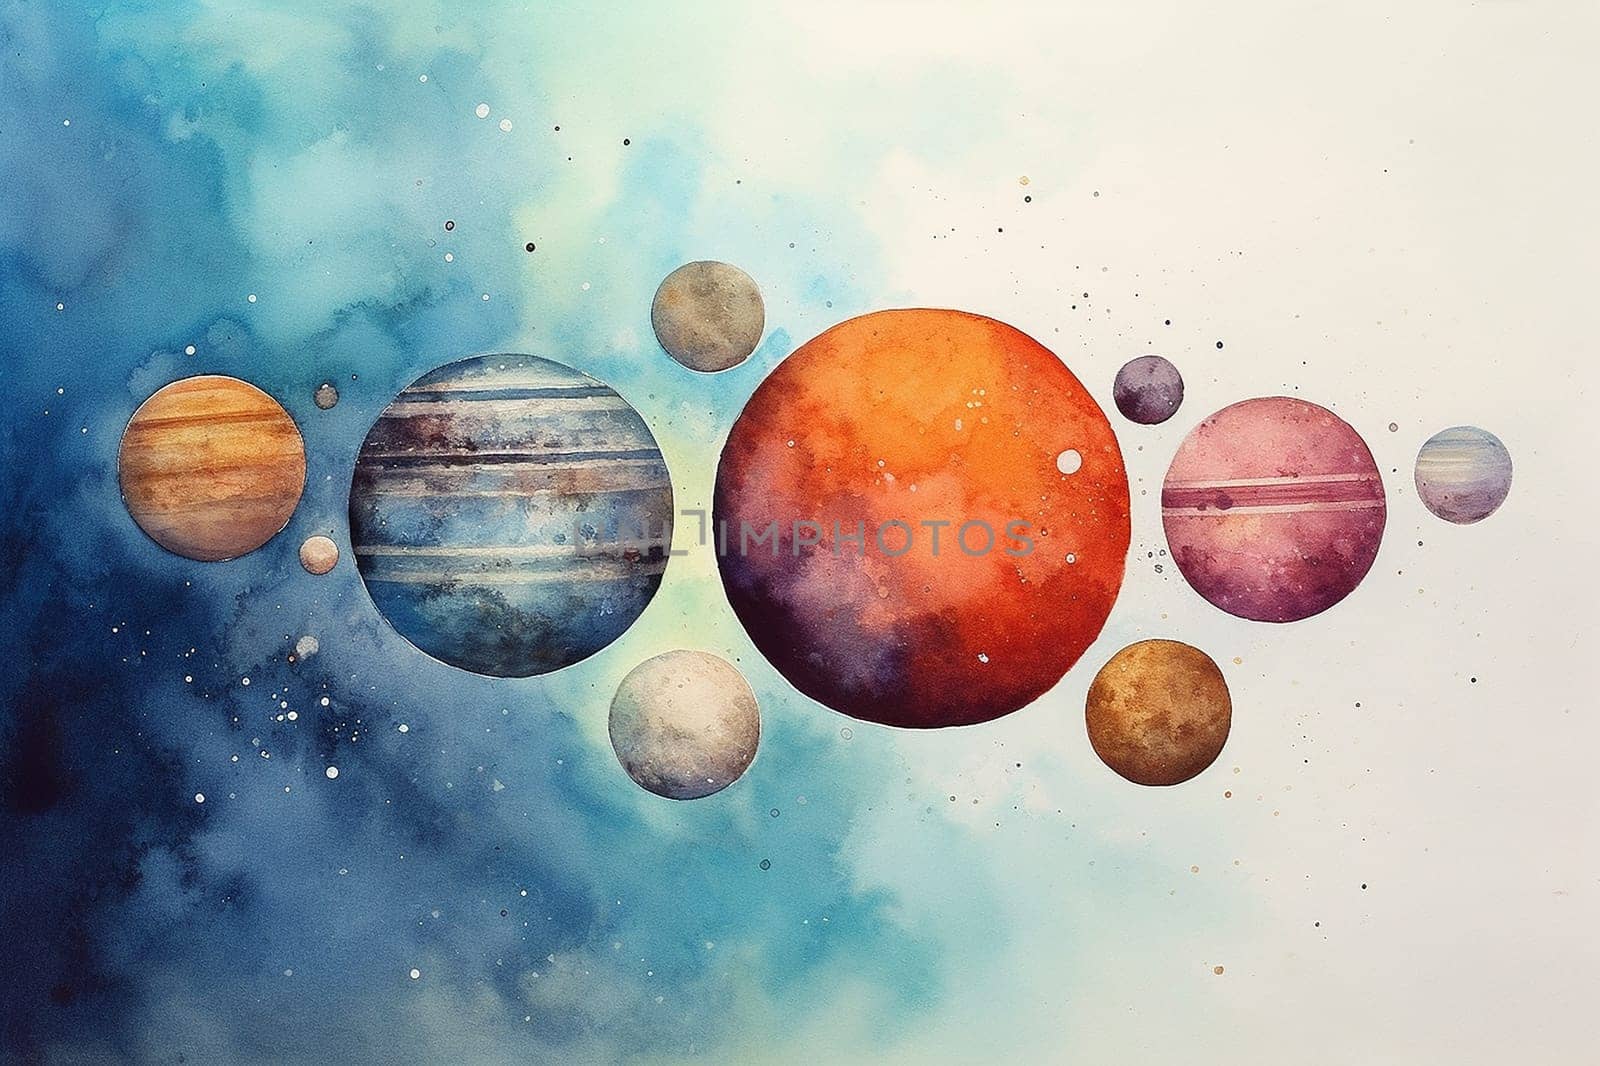 Watercolor painting of various planets and celestial bodies. by Hype2art